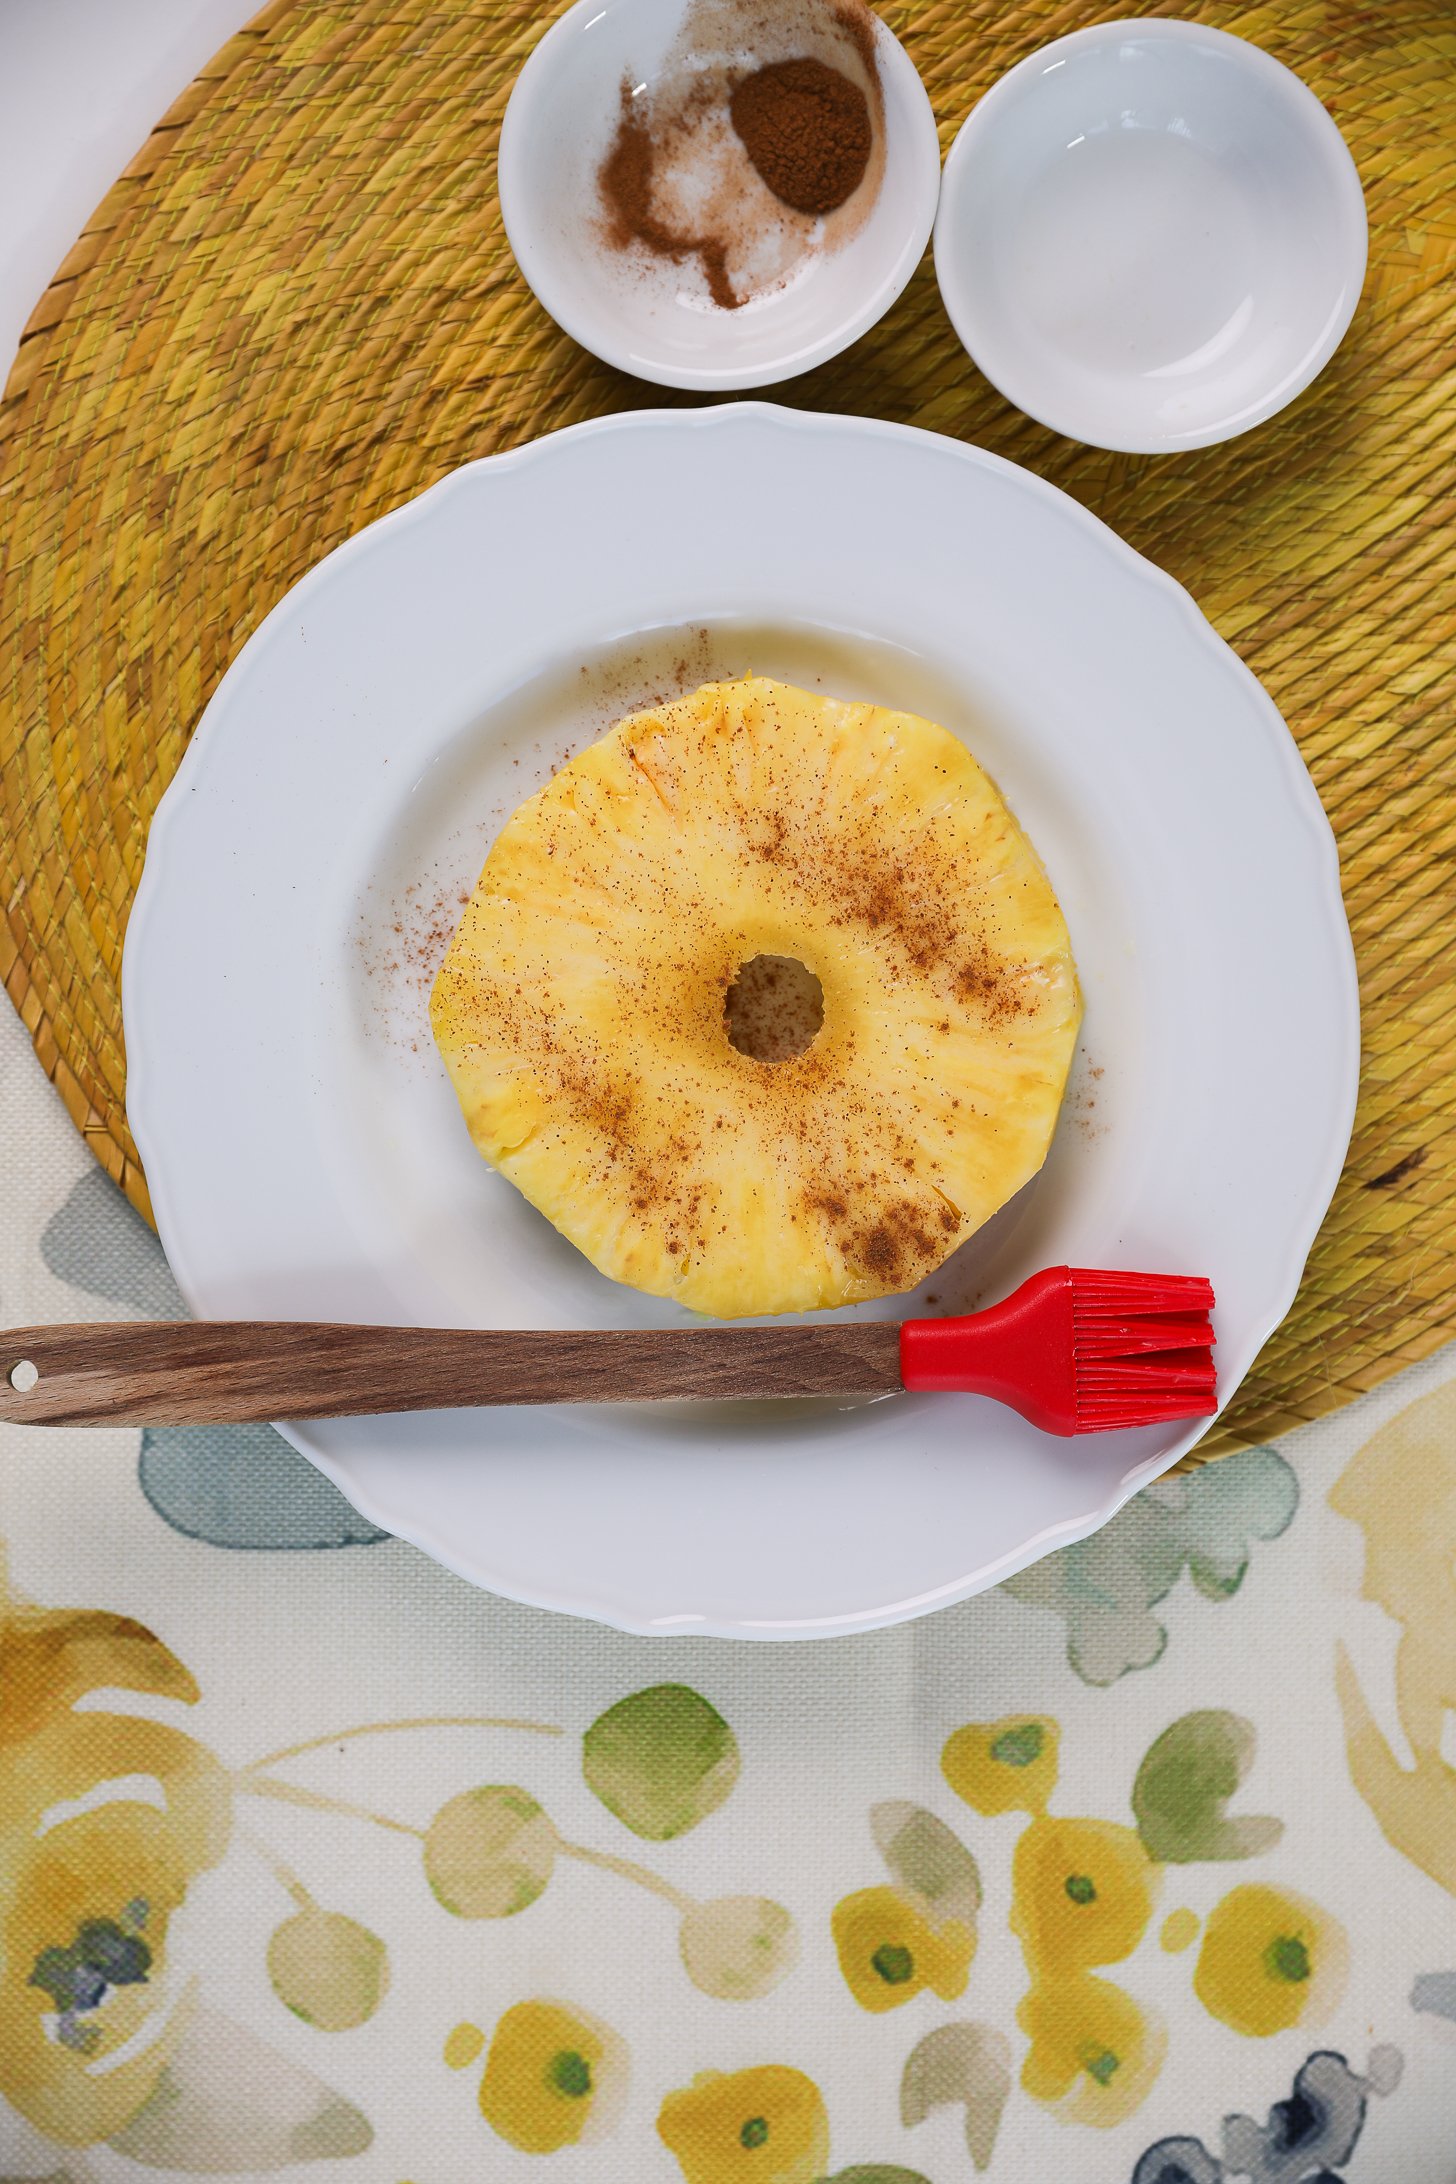 A ring of fresh pineapple sprinkled with cinnamon powder on a plate with a brush next to it.